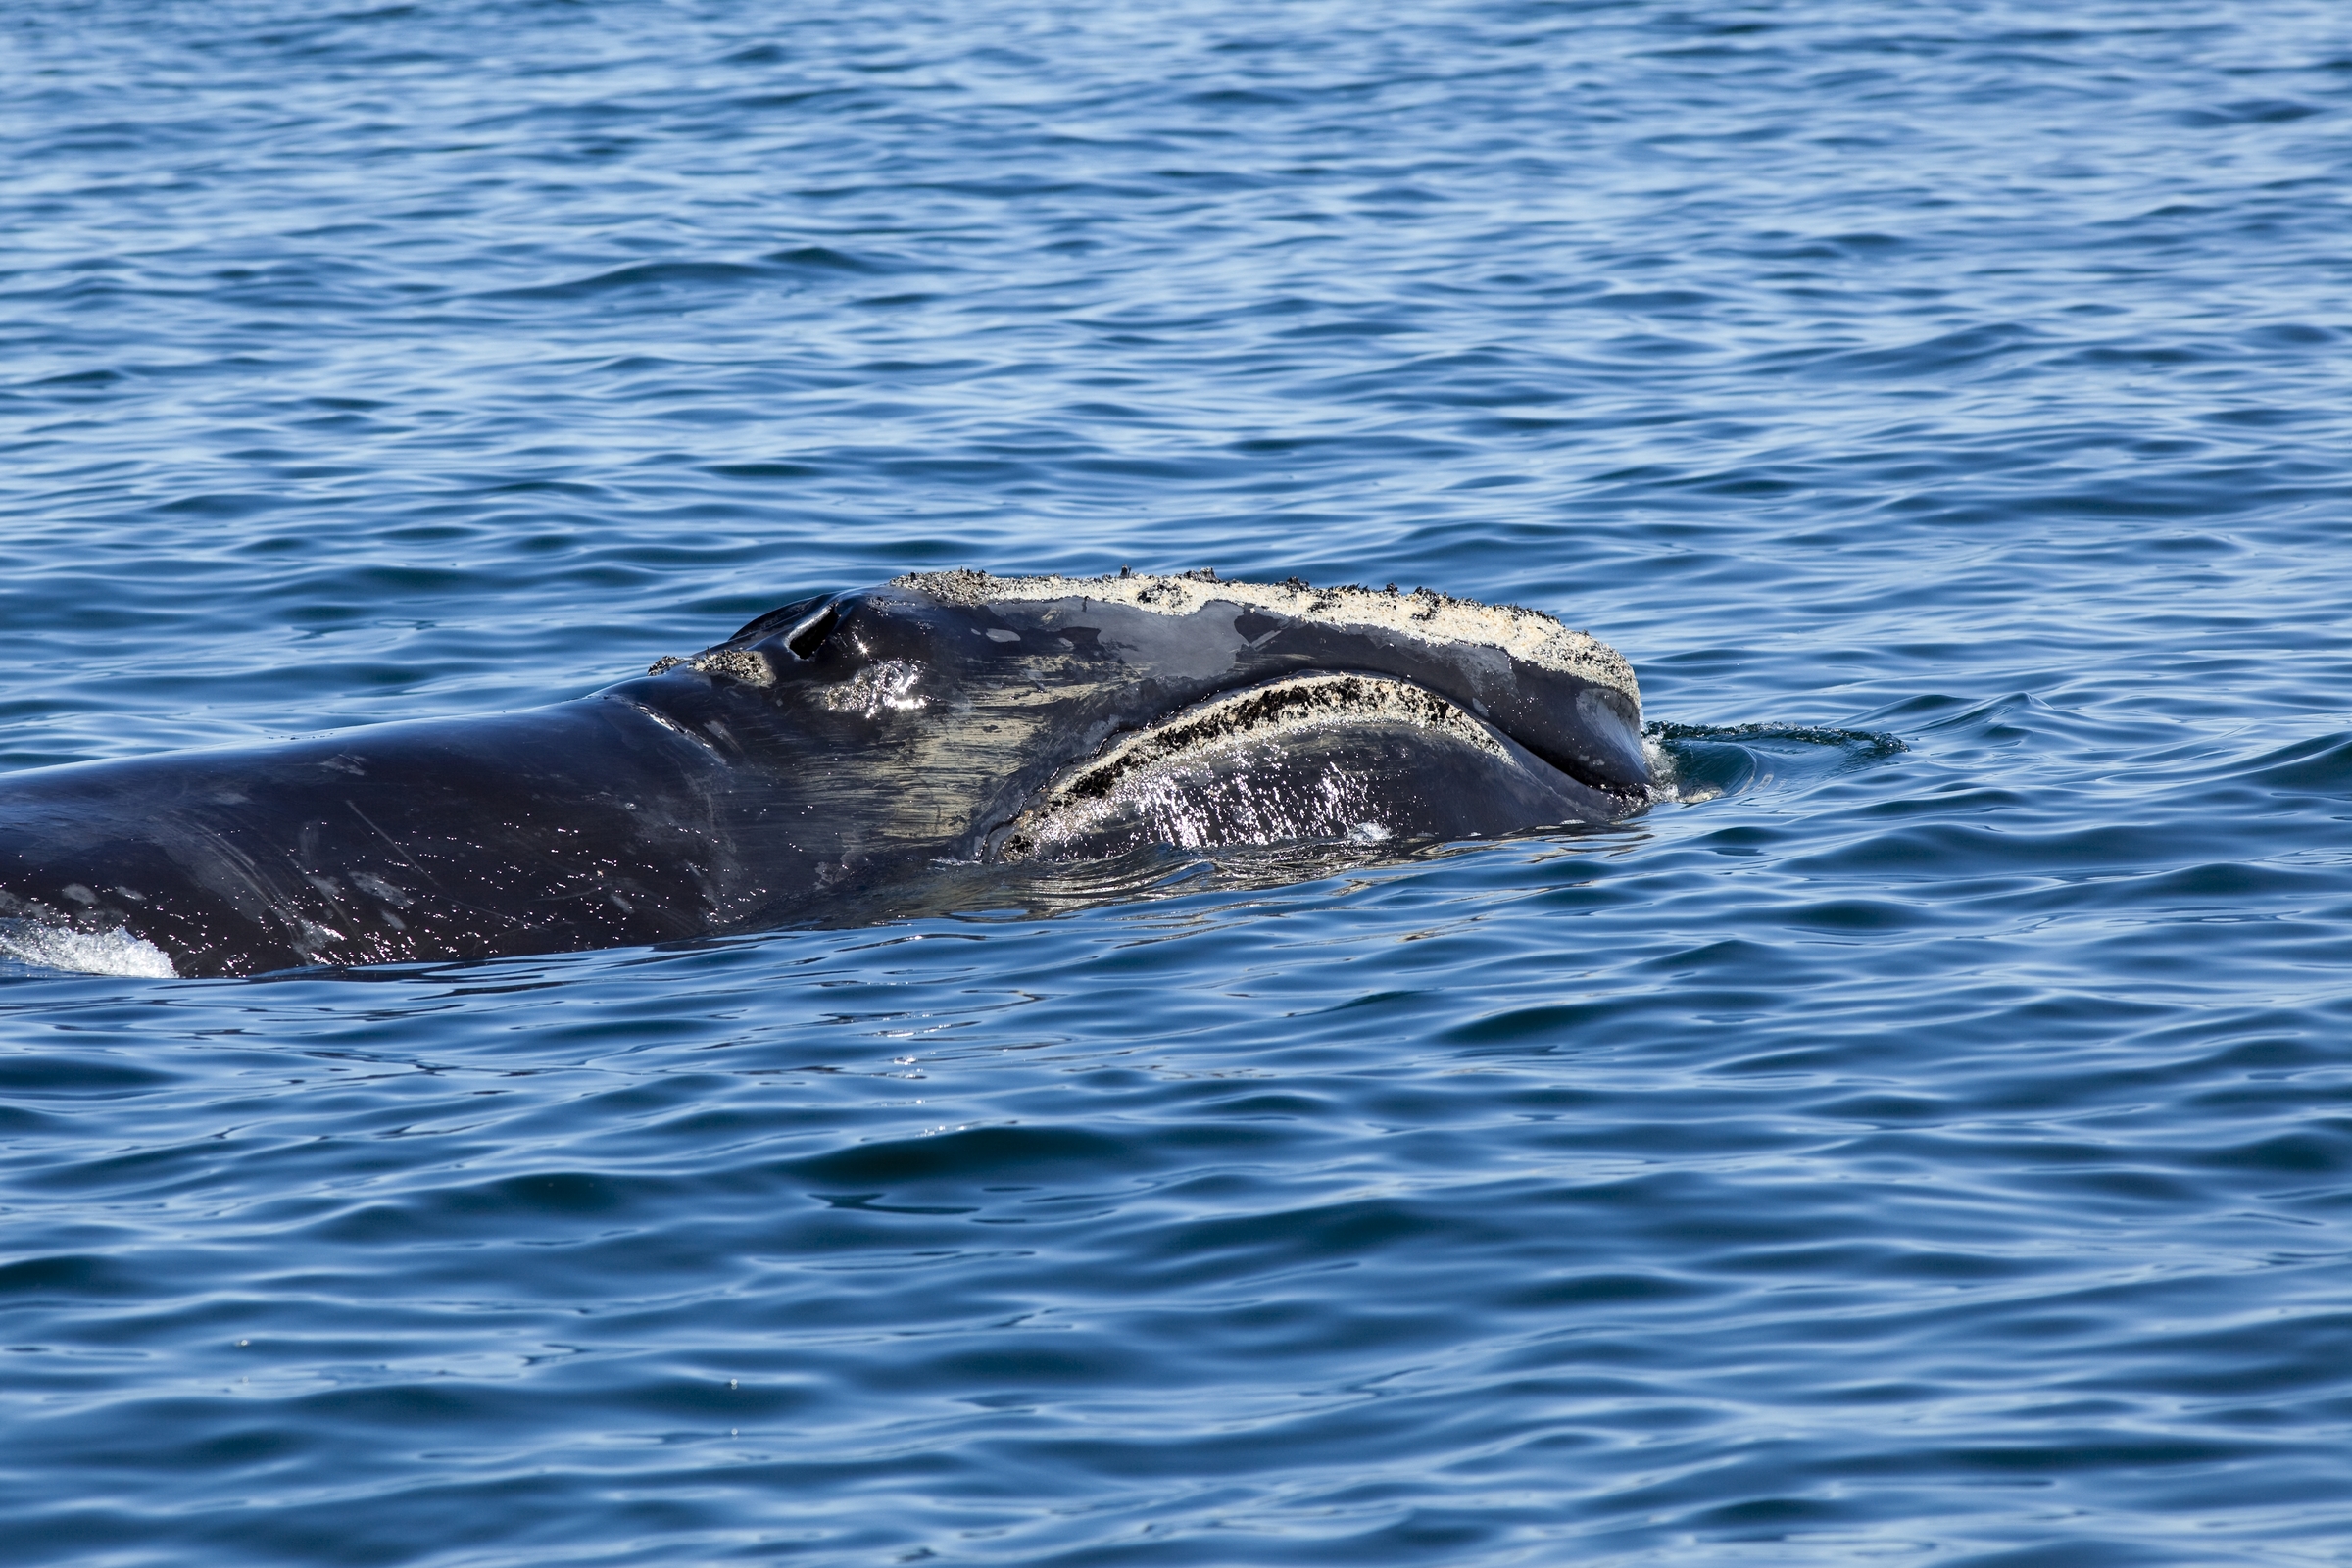 North Atlantic right whale off Grand Manan Island, Bay of Fundy, New Brunswick, Canada.